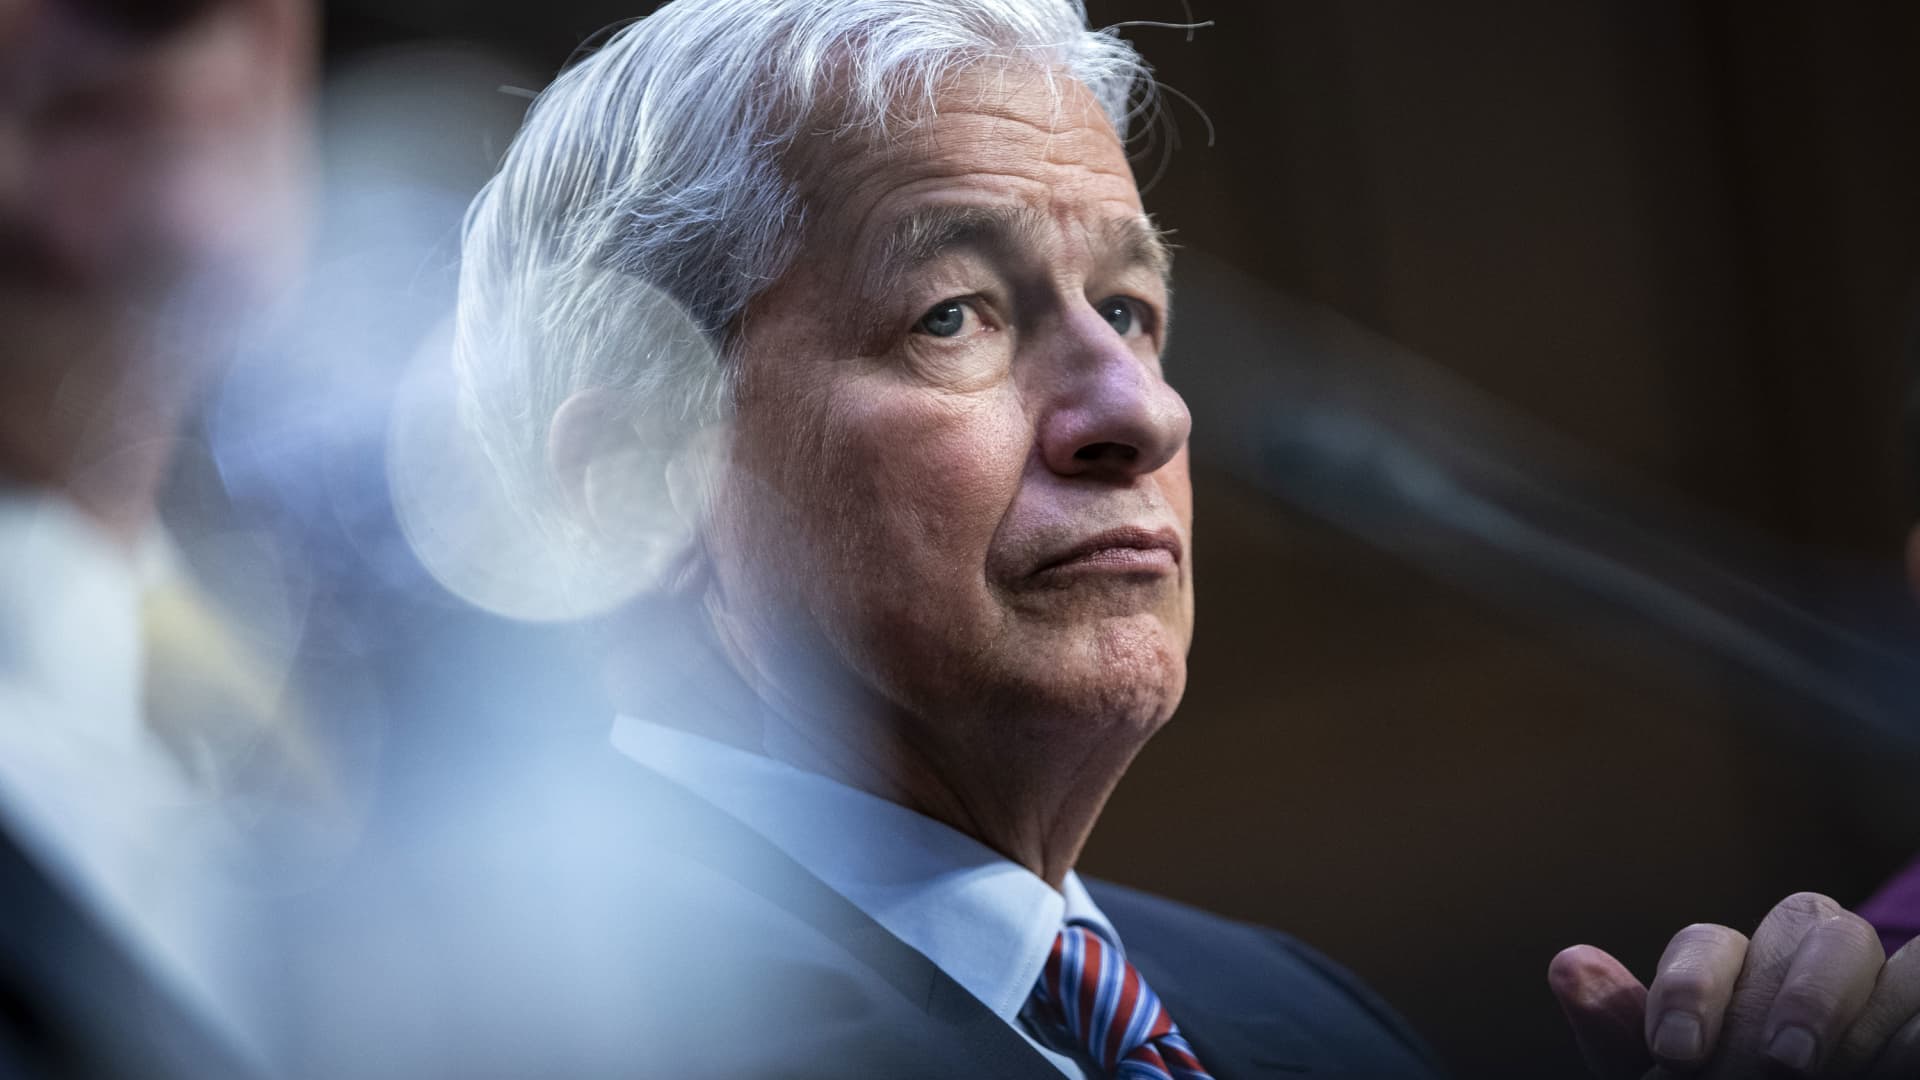 JPMorgan rejects claim that Dimon and Staley discussed Epstein: ‘We believe this is false’